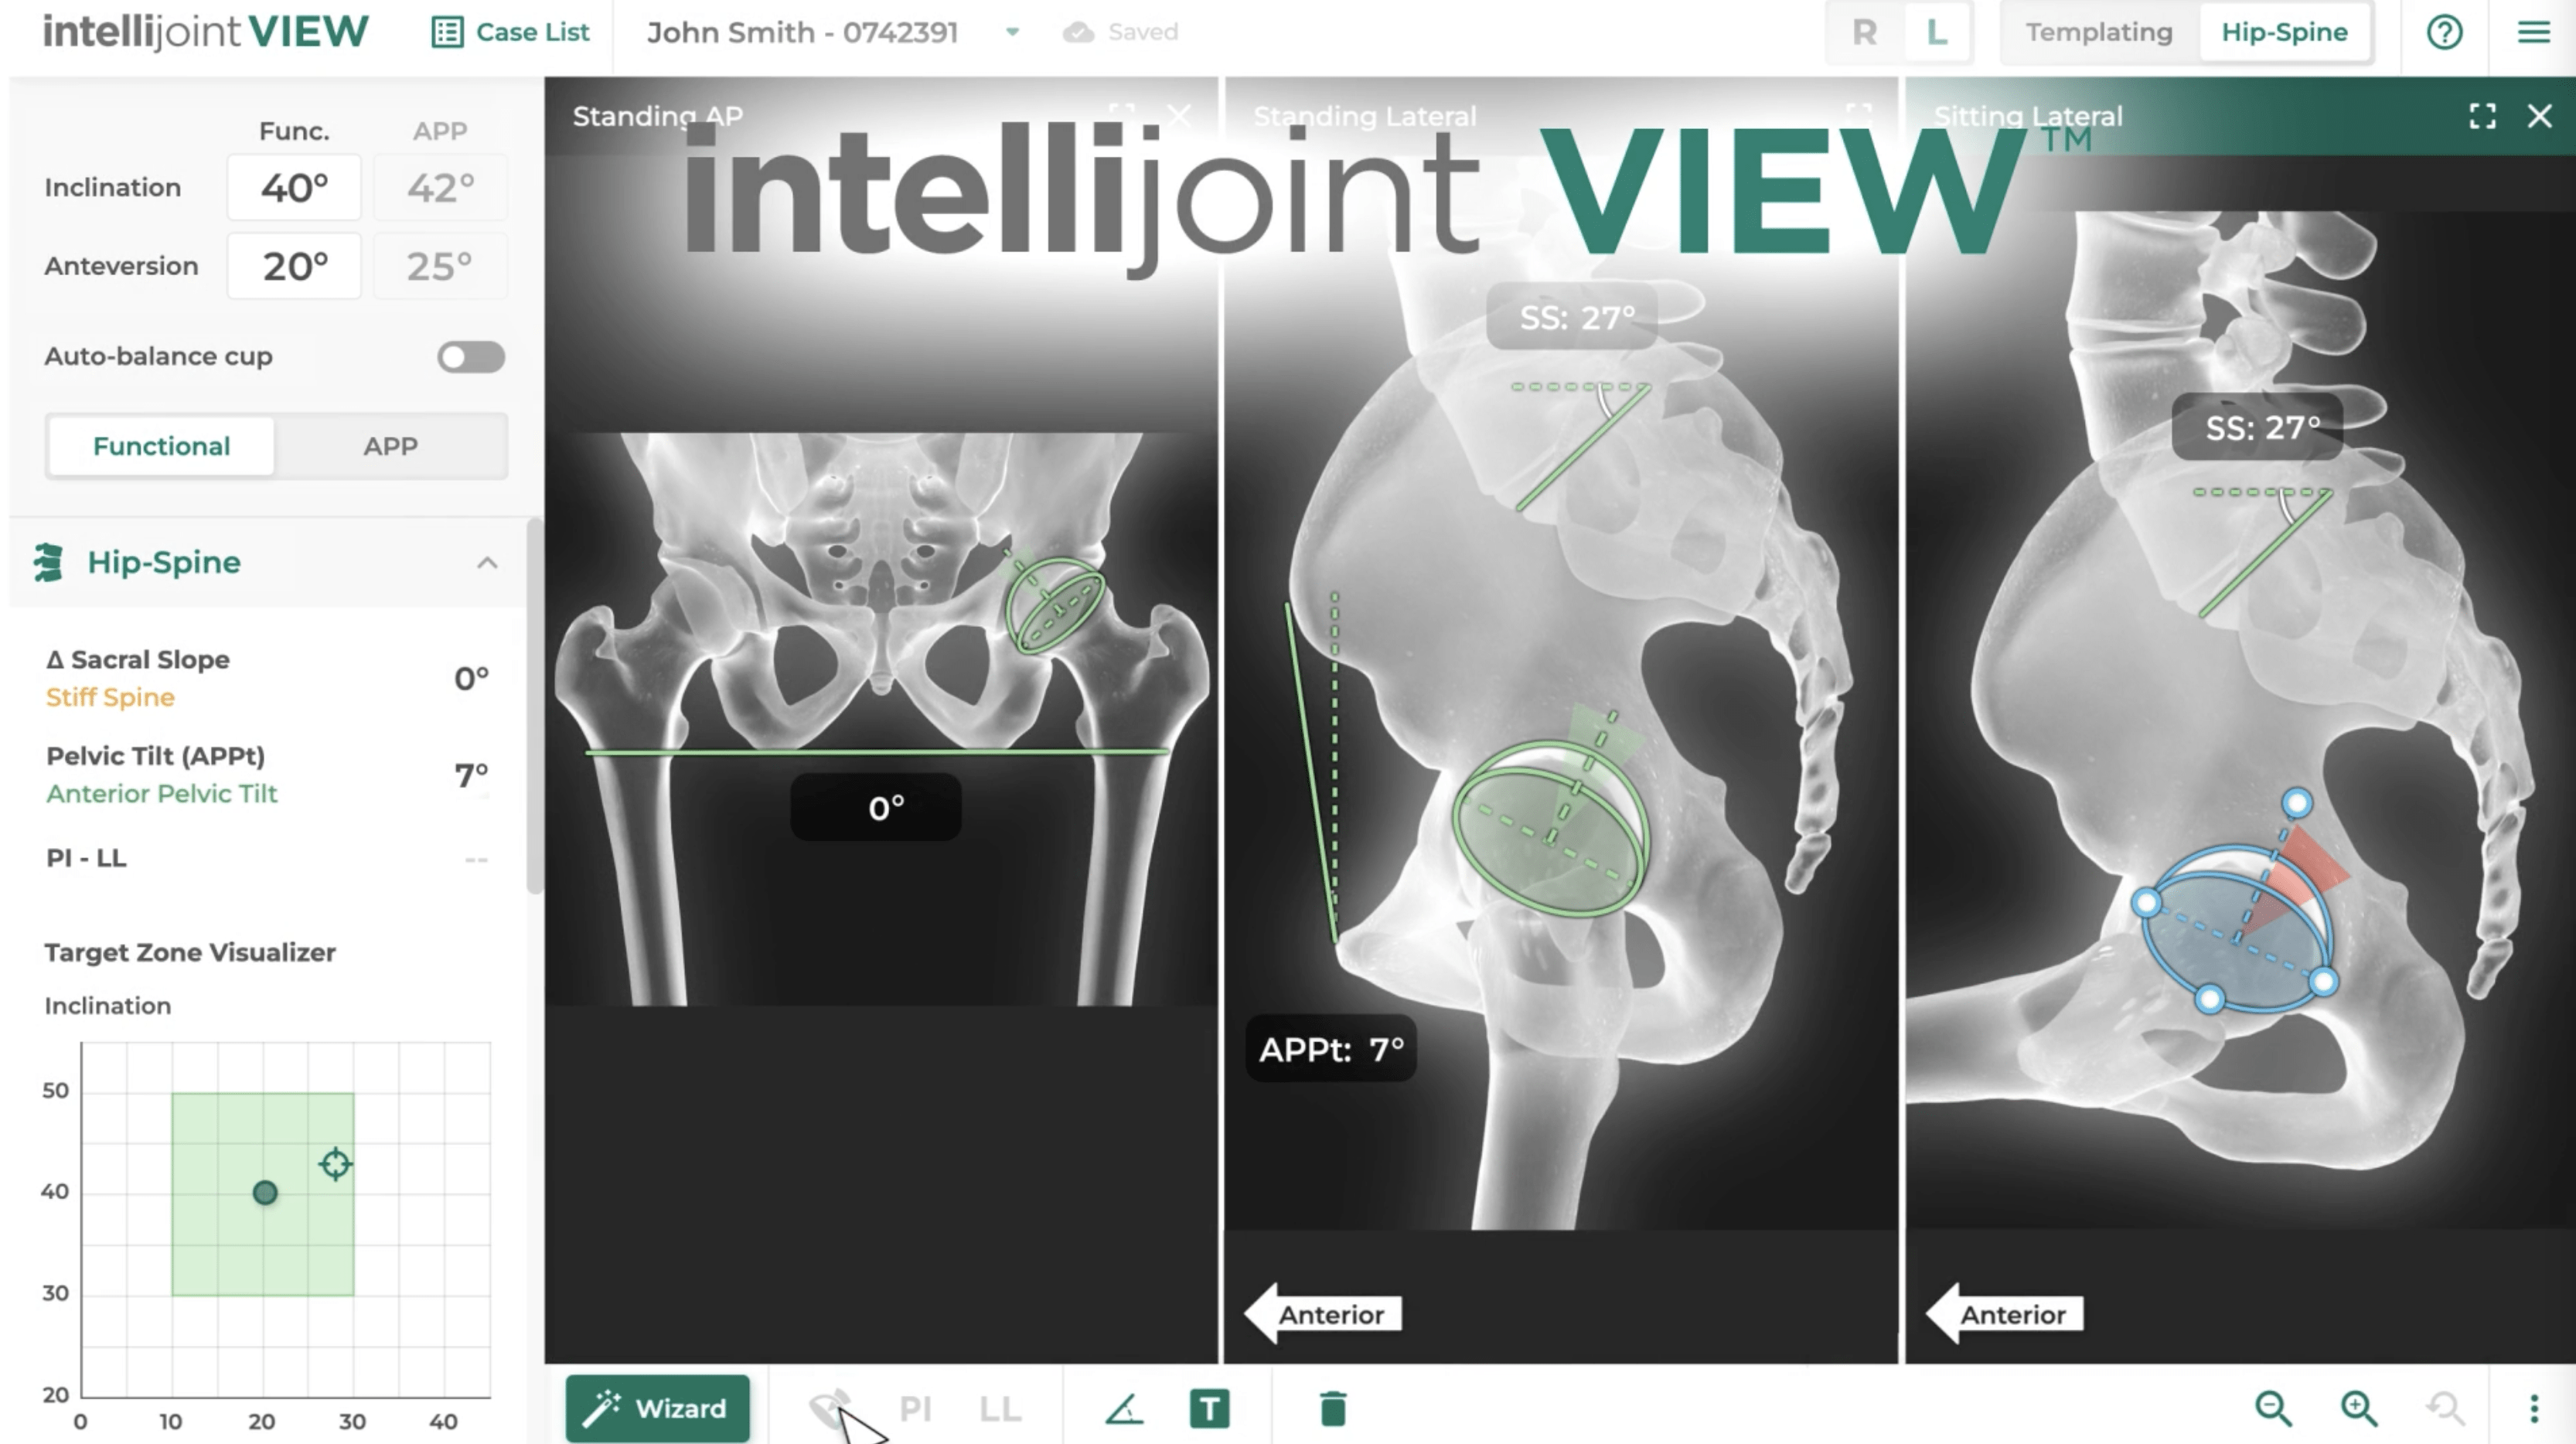 Screen of web-based surgical platform showing 3 x-rays of different pelvic views